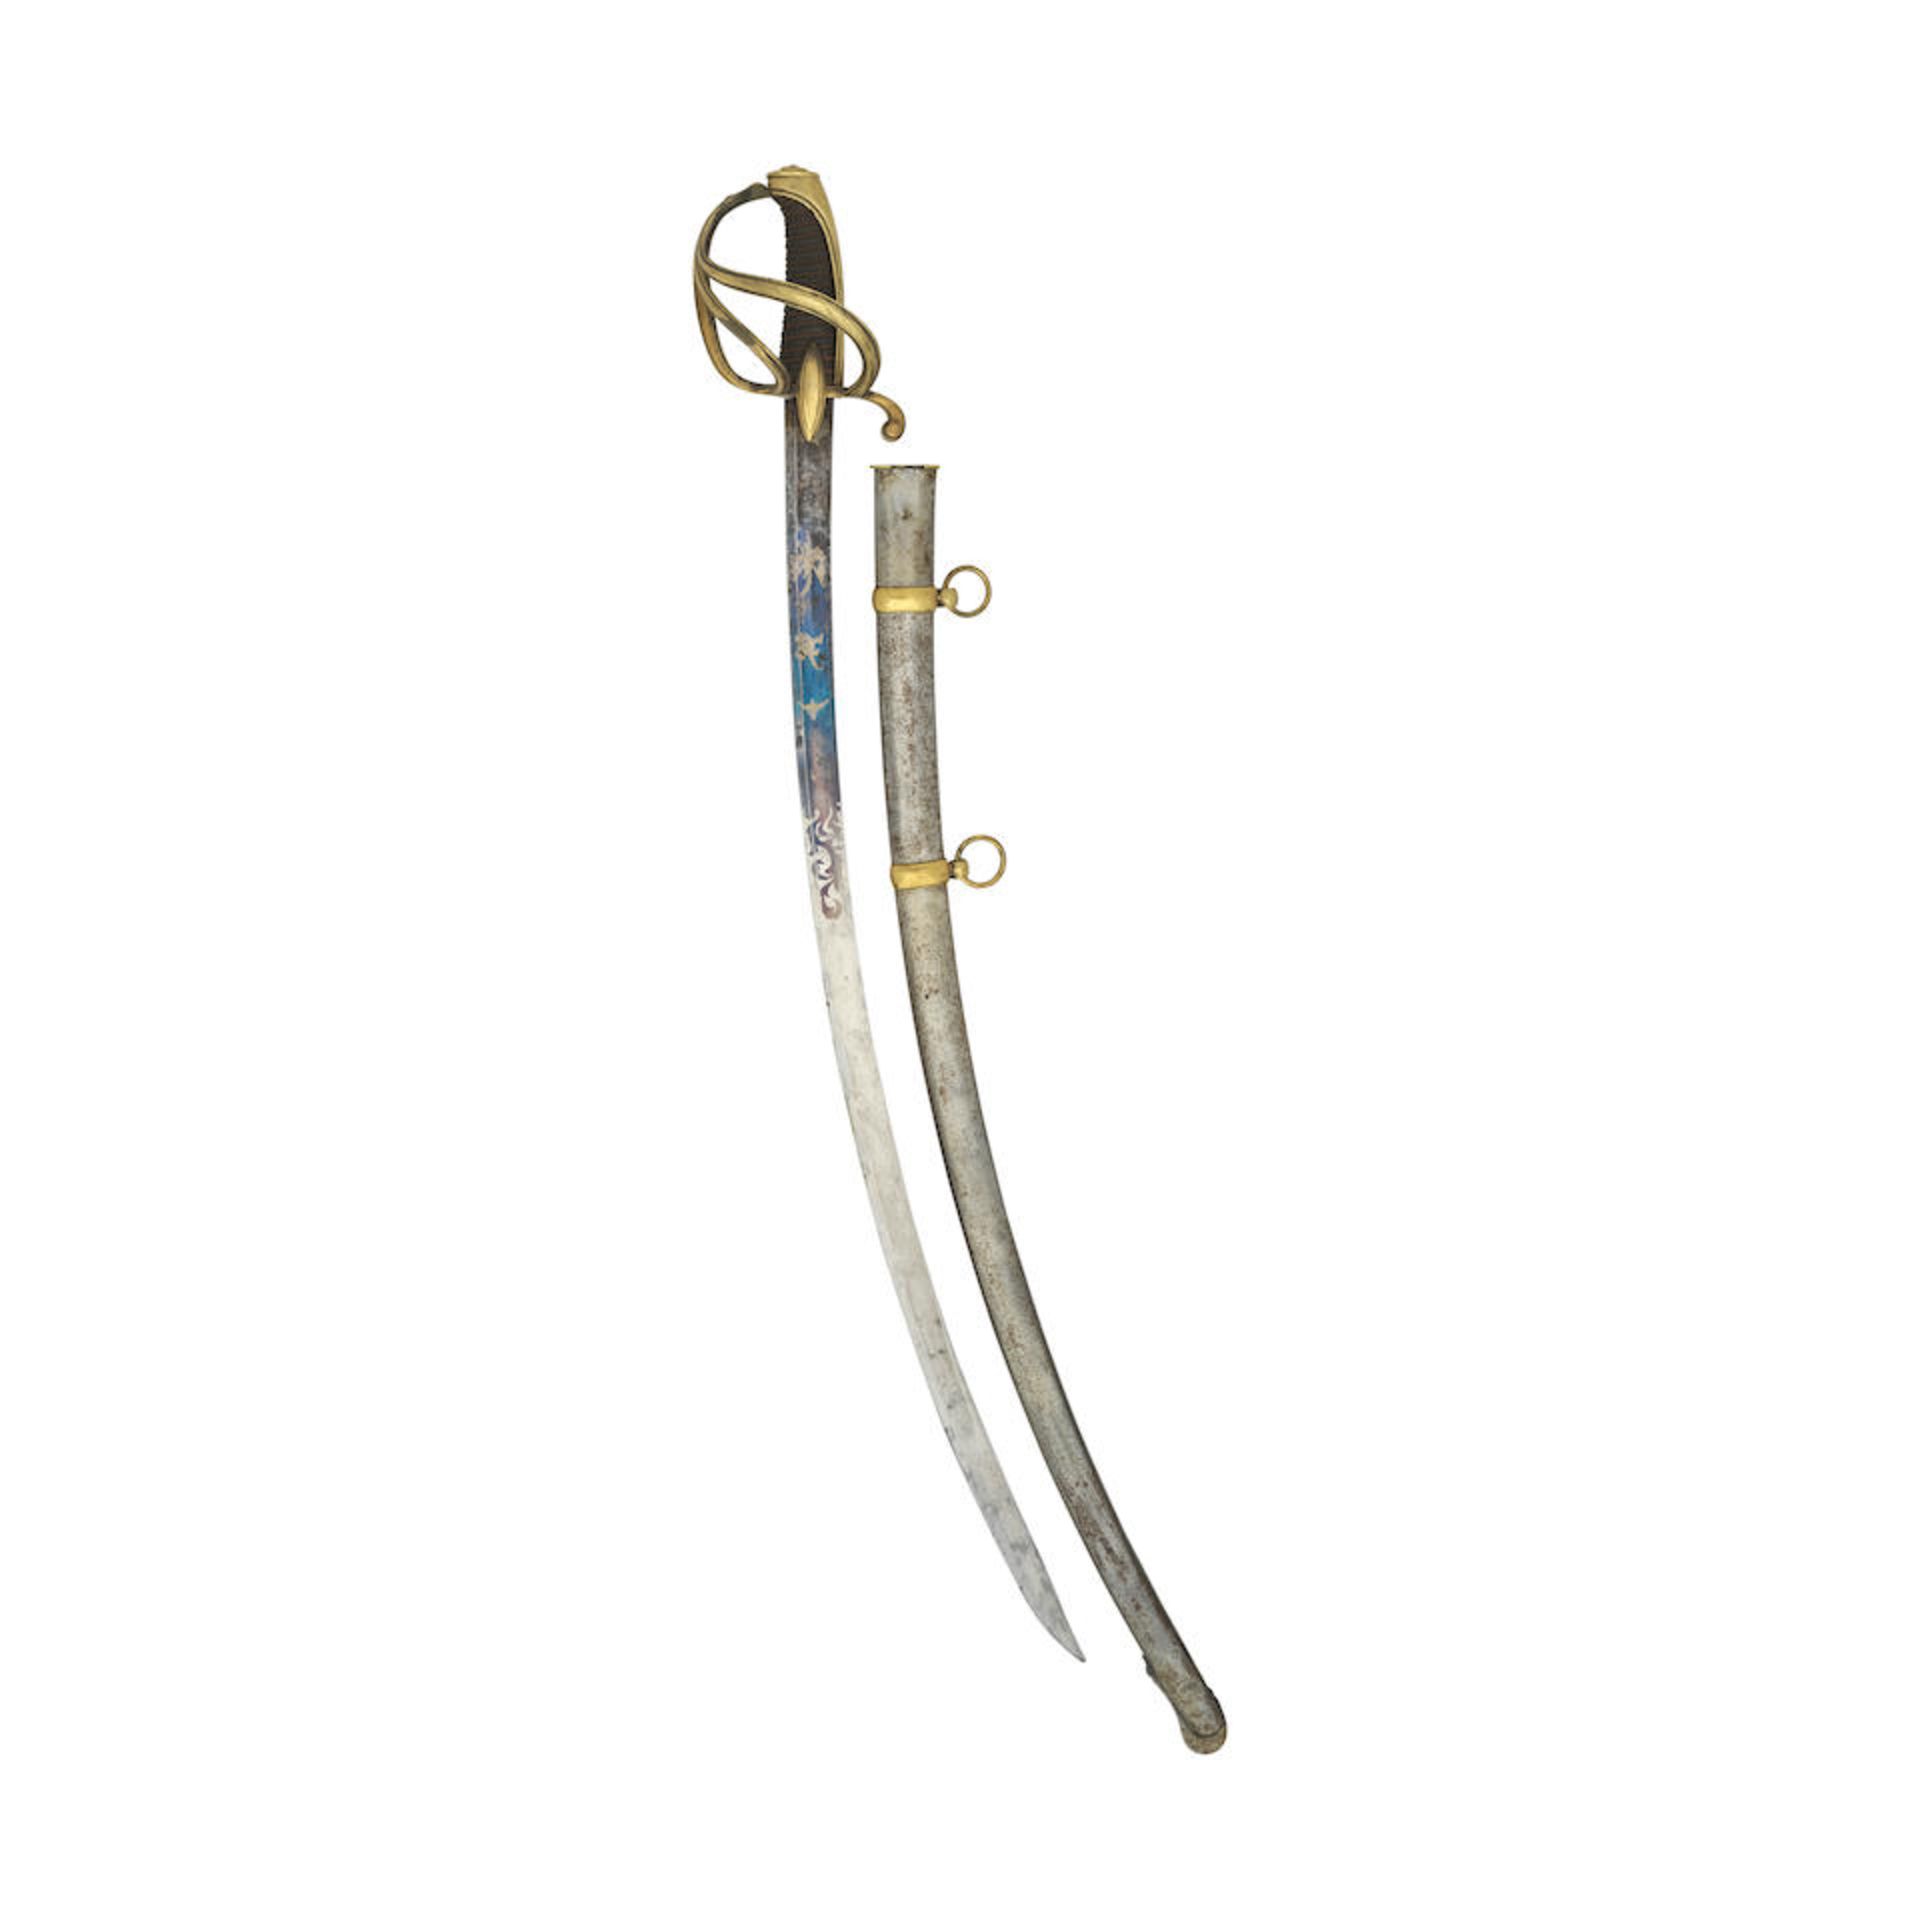 A French Light Cavalry Officer's Sabre